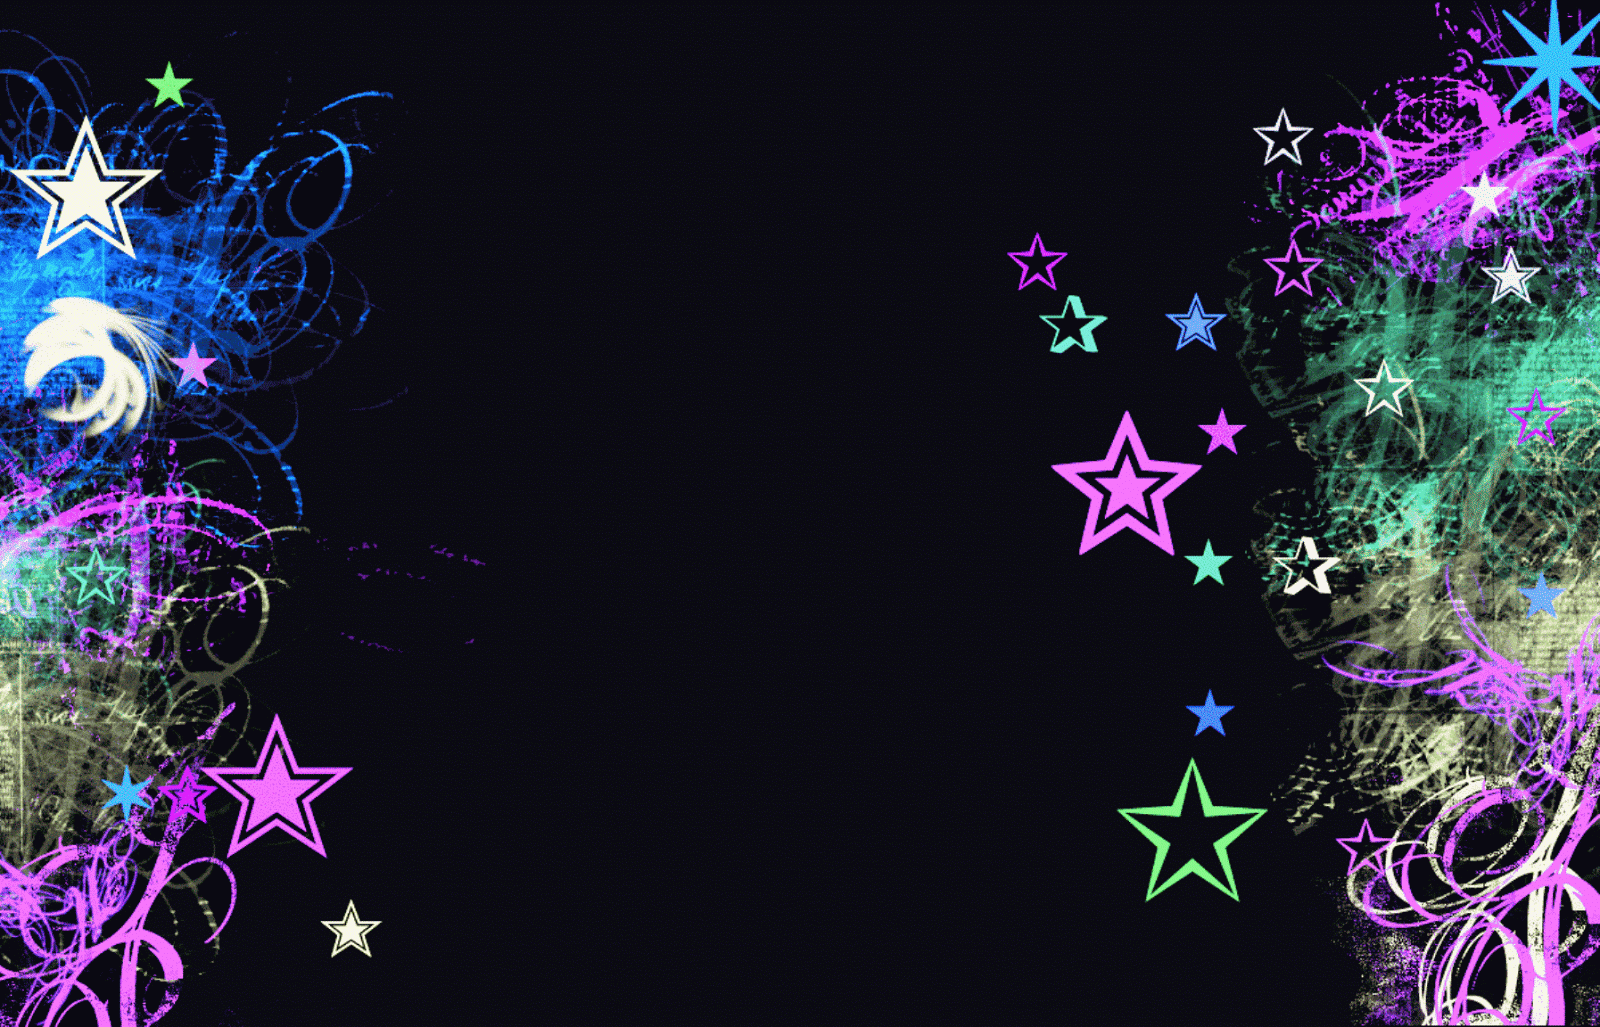 The Nices Wallpaper Black Background With Stars